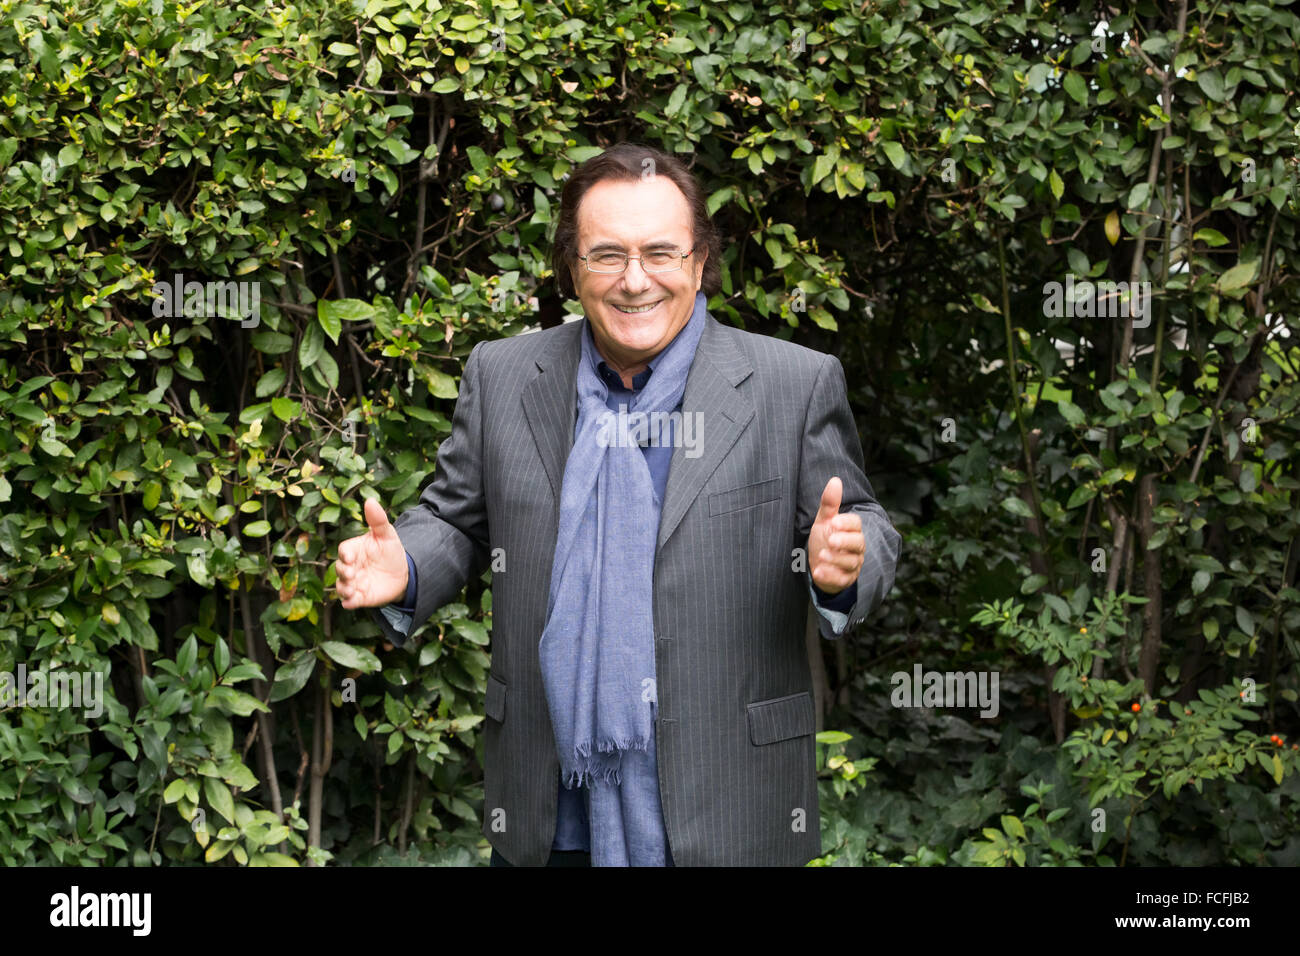 Rome, Italy. 20th Jan, 2016. Albano and Romina Power back together in a program of RAI one that helps you find the missing persons. © Mauro Fagiani/Pacific Press/Alamy Live News Stock Photo